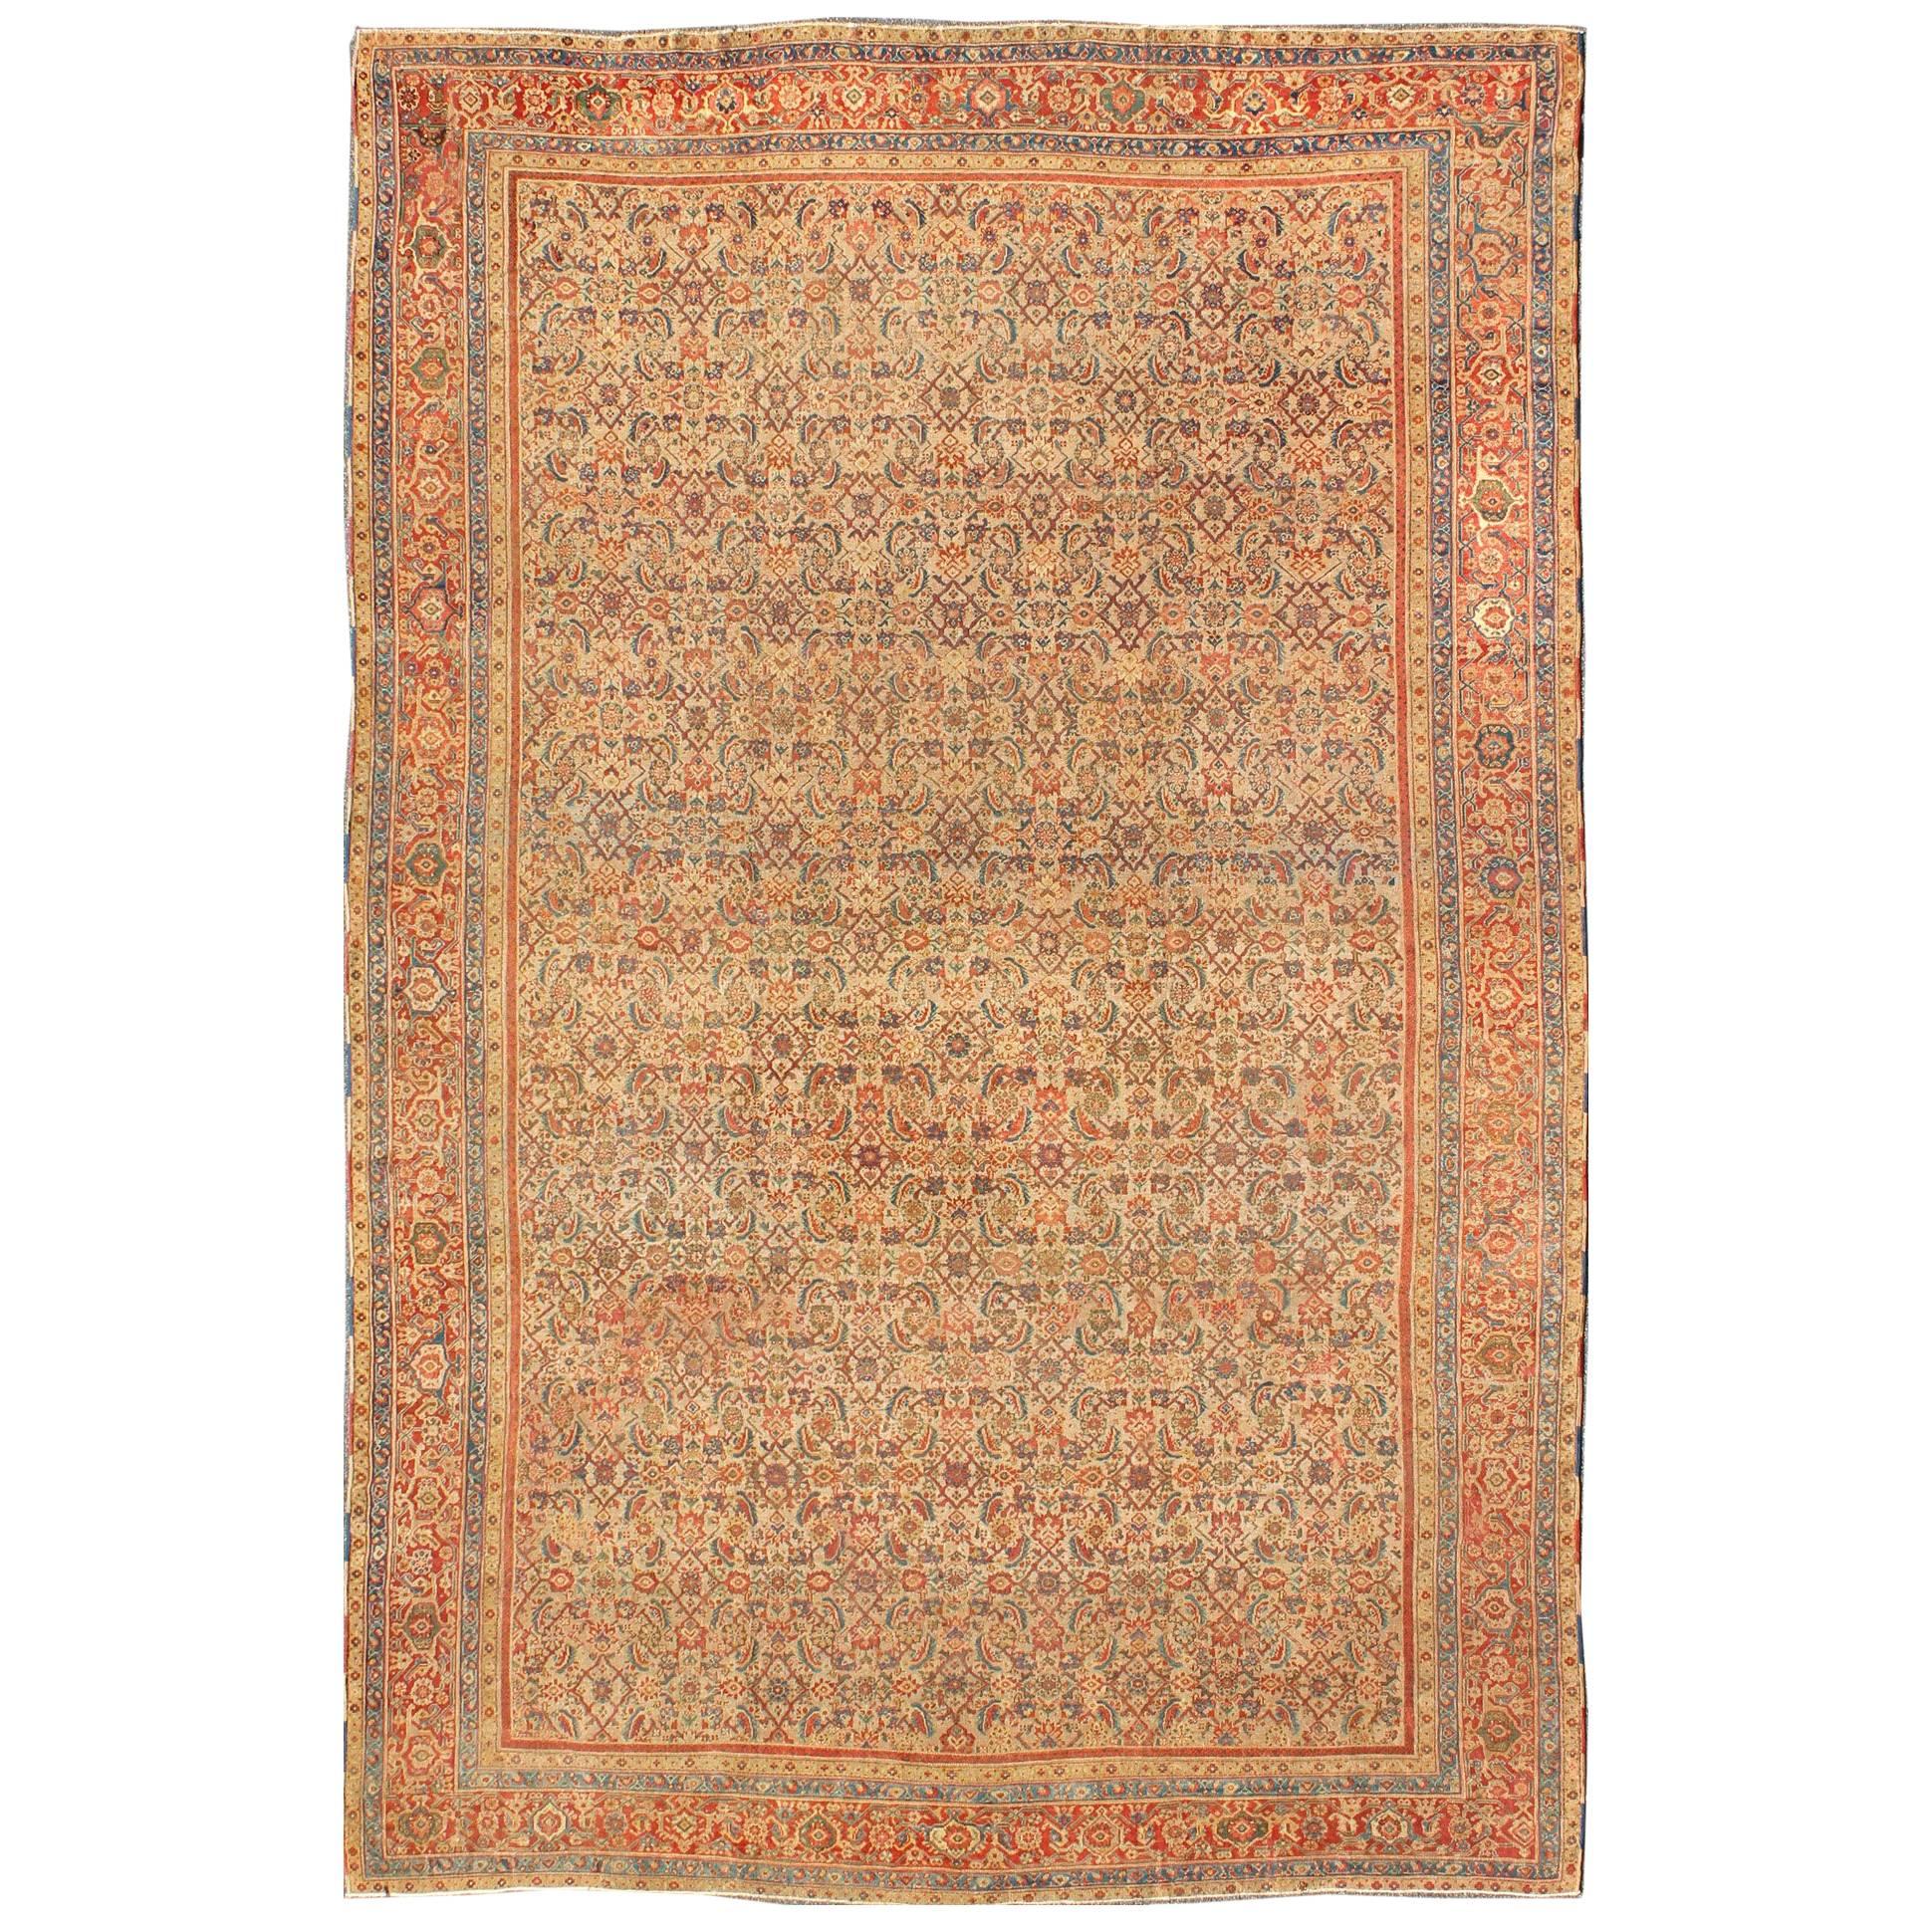 Grandiose Antique Persian Sultanabad Rug in Tan Background, Rust Red, Green